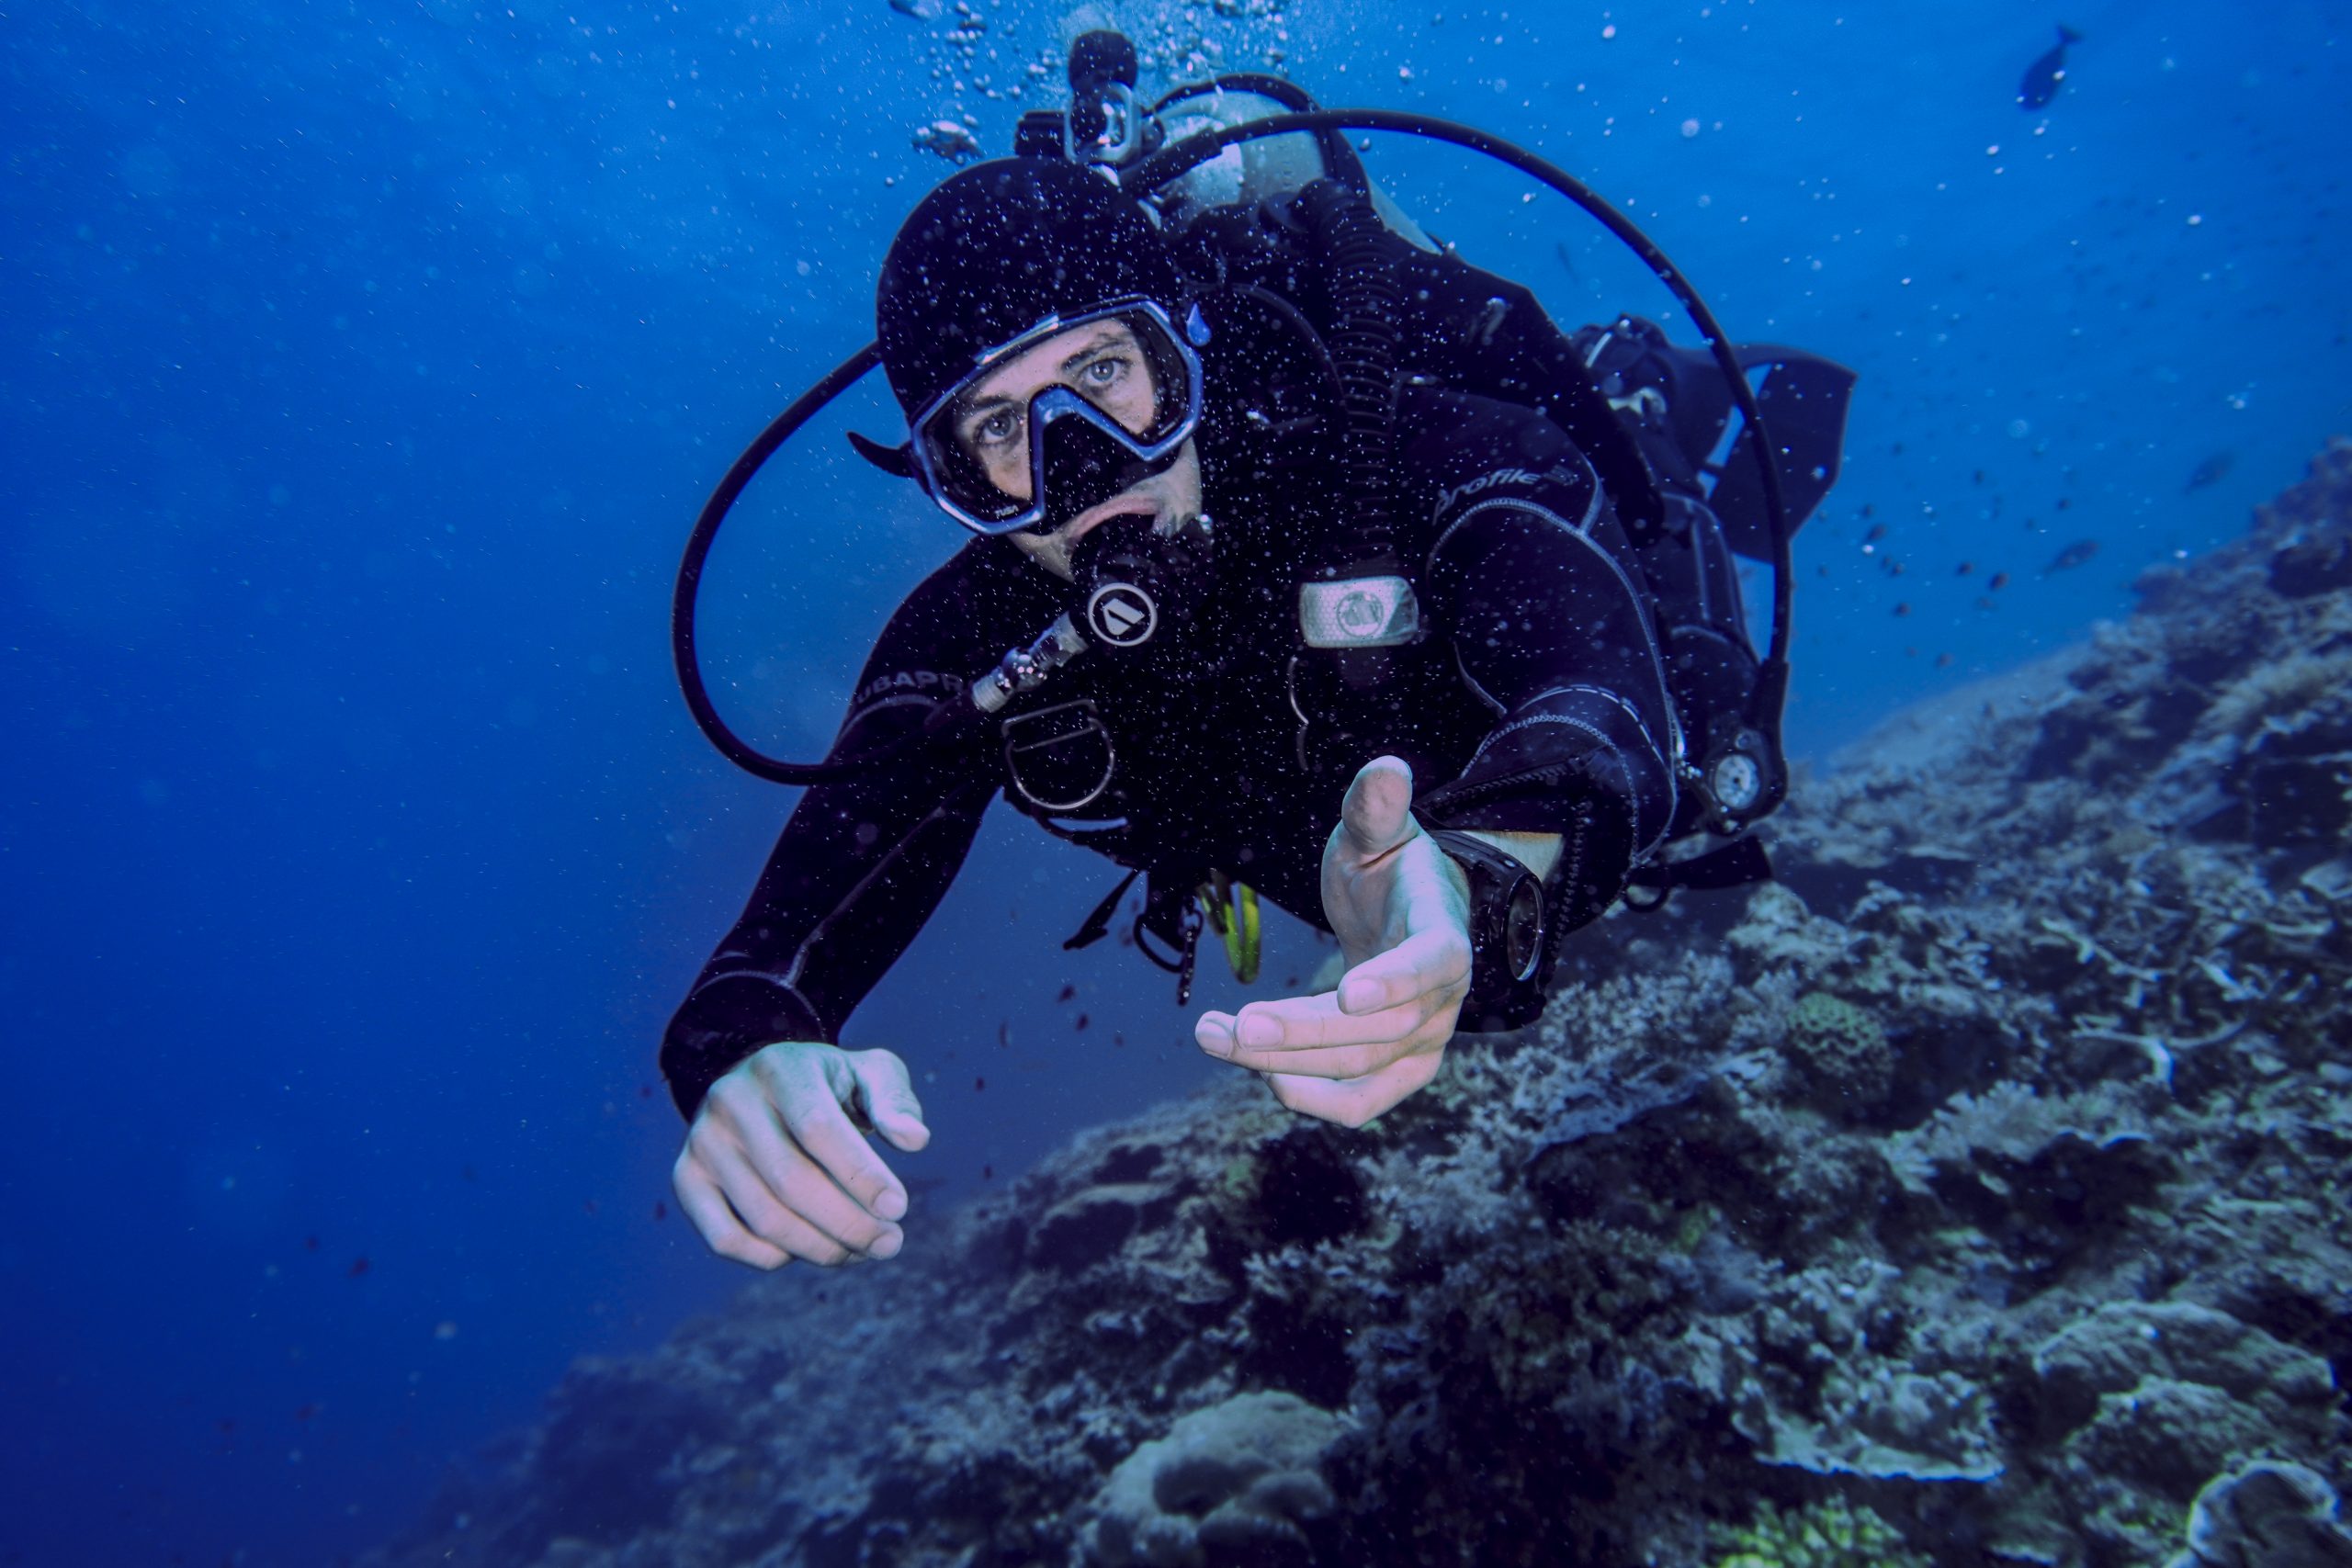 A scuba diving fellow reaches her hand out in an inviting manner.